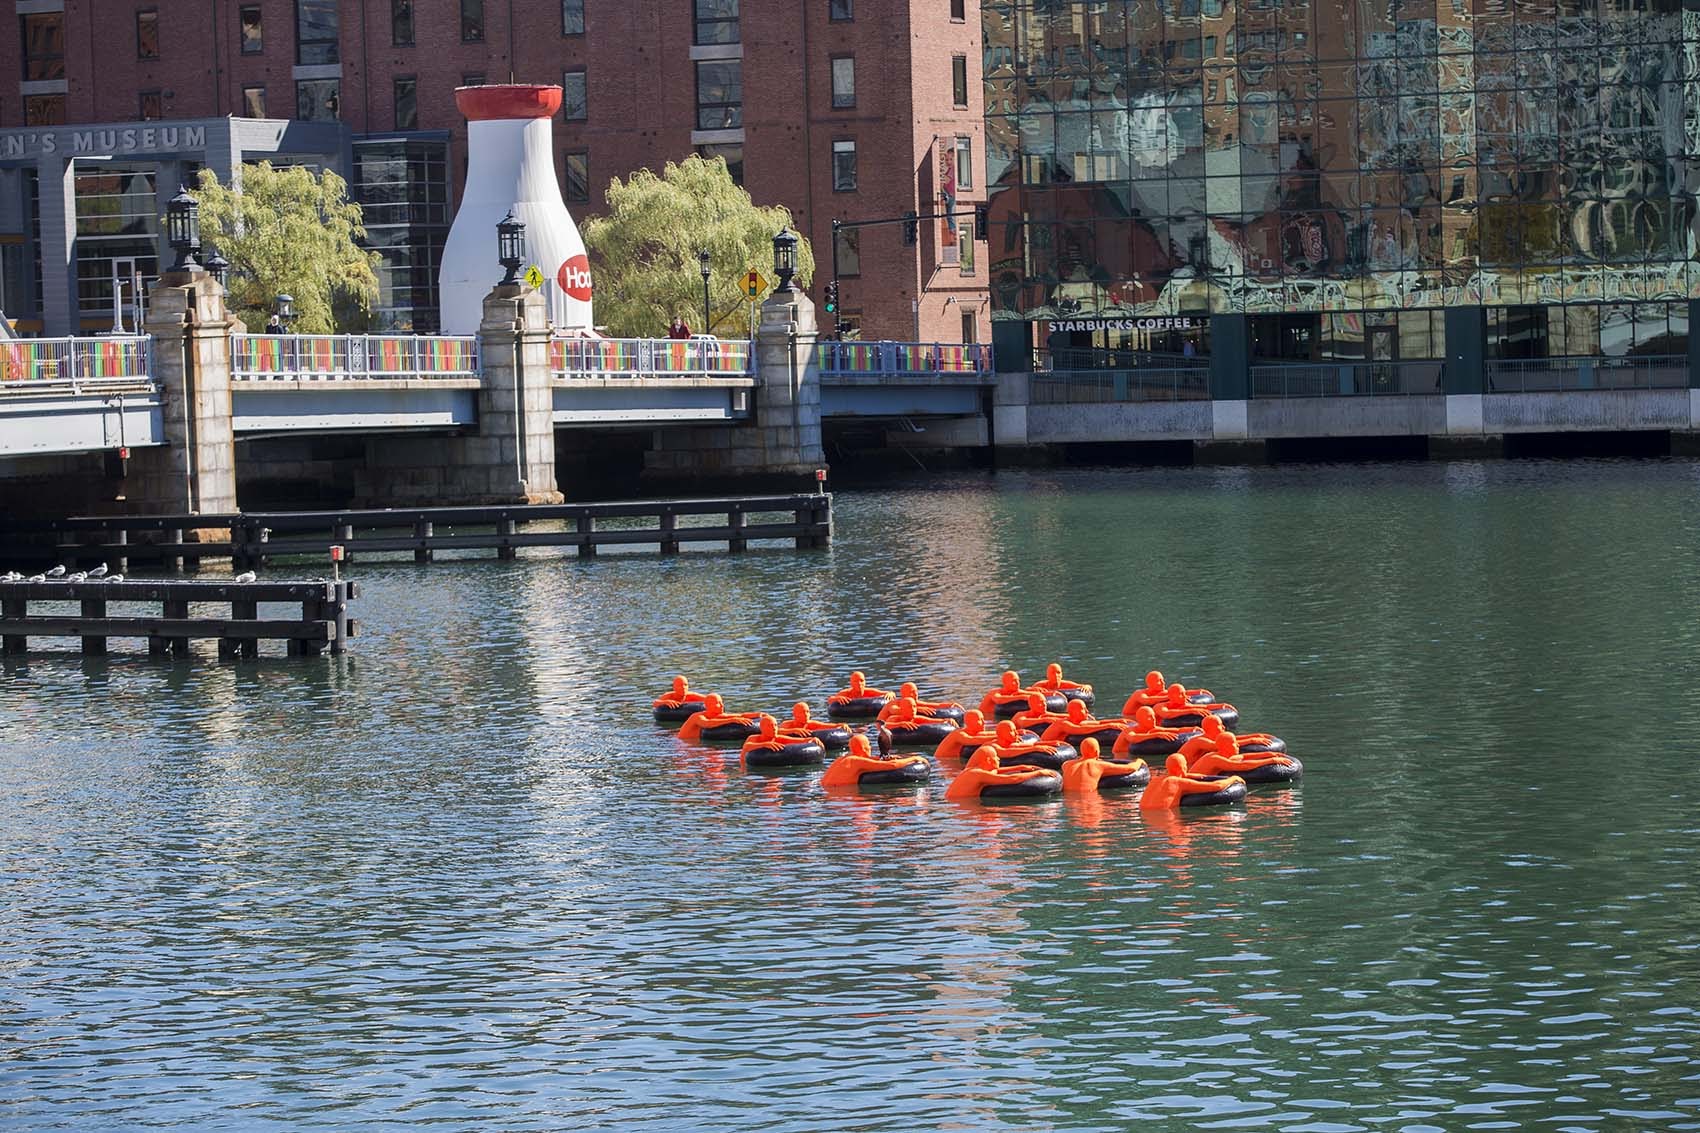 &quot;SOS (Safety Orange Swimmers)&quot; as seen in the Fort Point Channel. (Jesse Costa/WBUR)